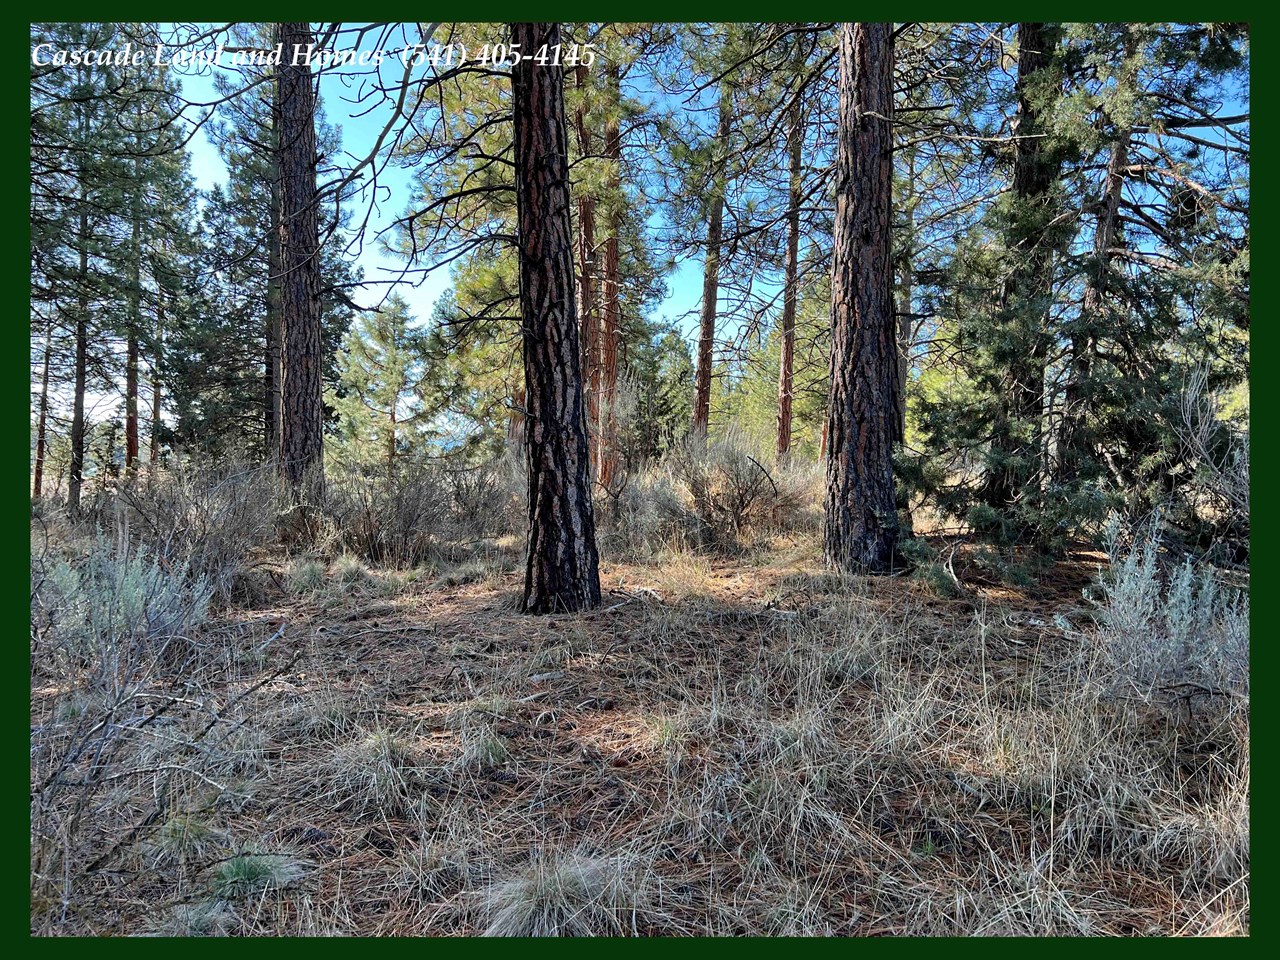 view of the understory with native vegistation including sage and native grasses.